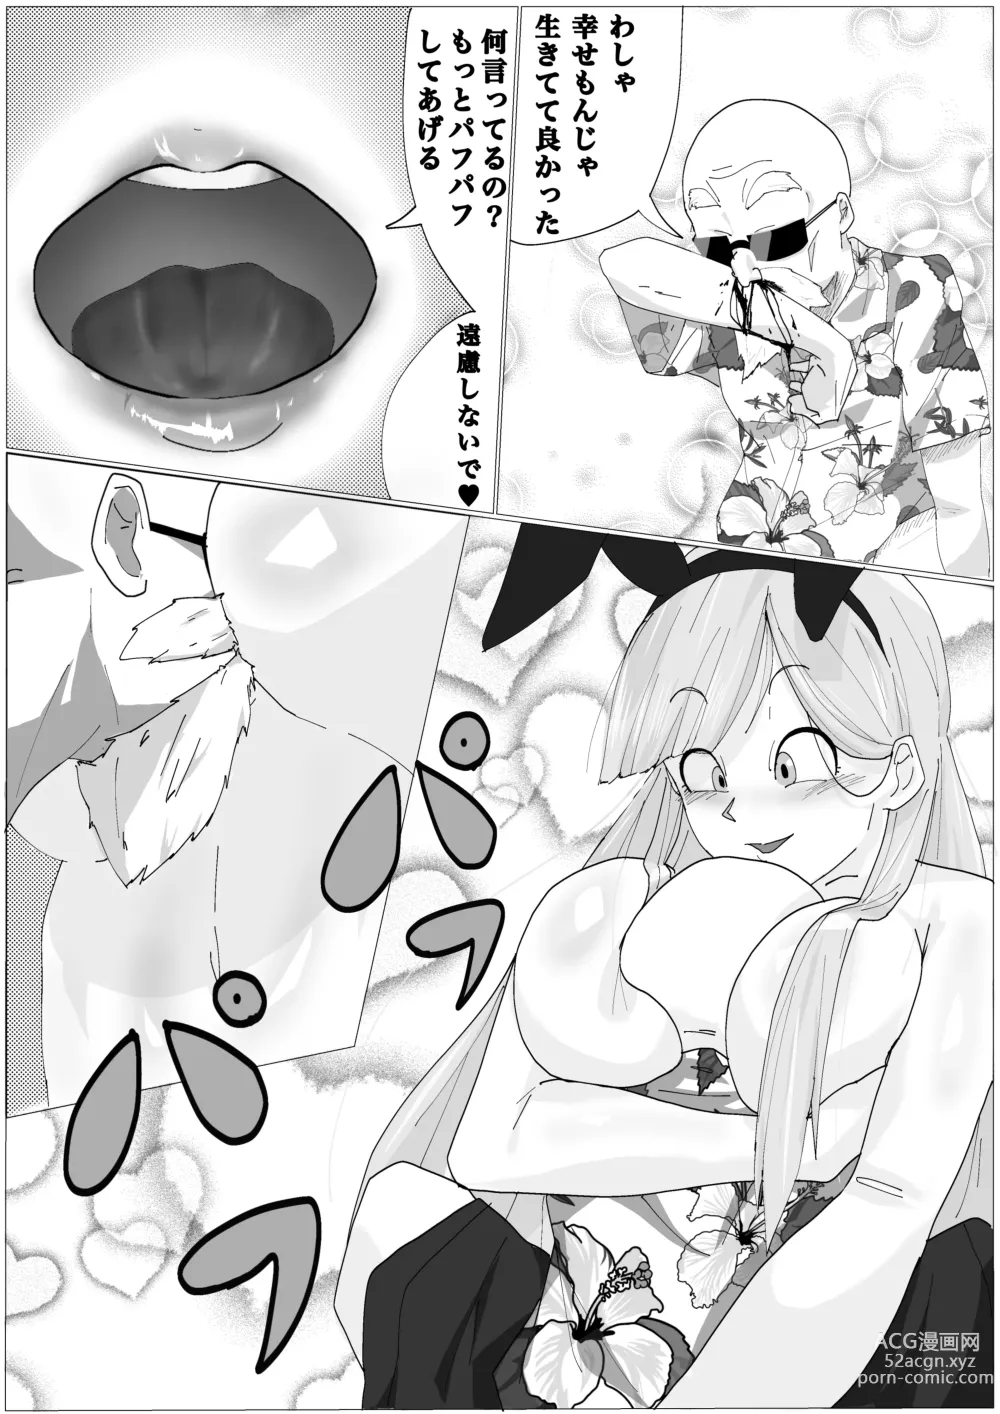 Page 3 of doujinshi Untitled